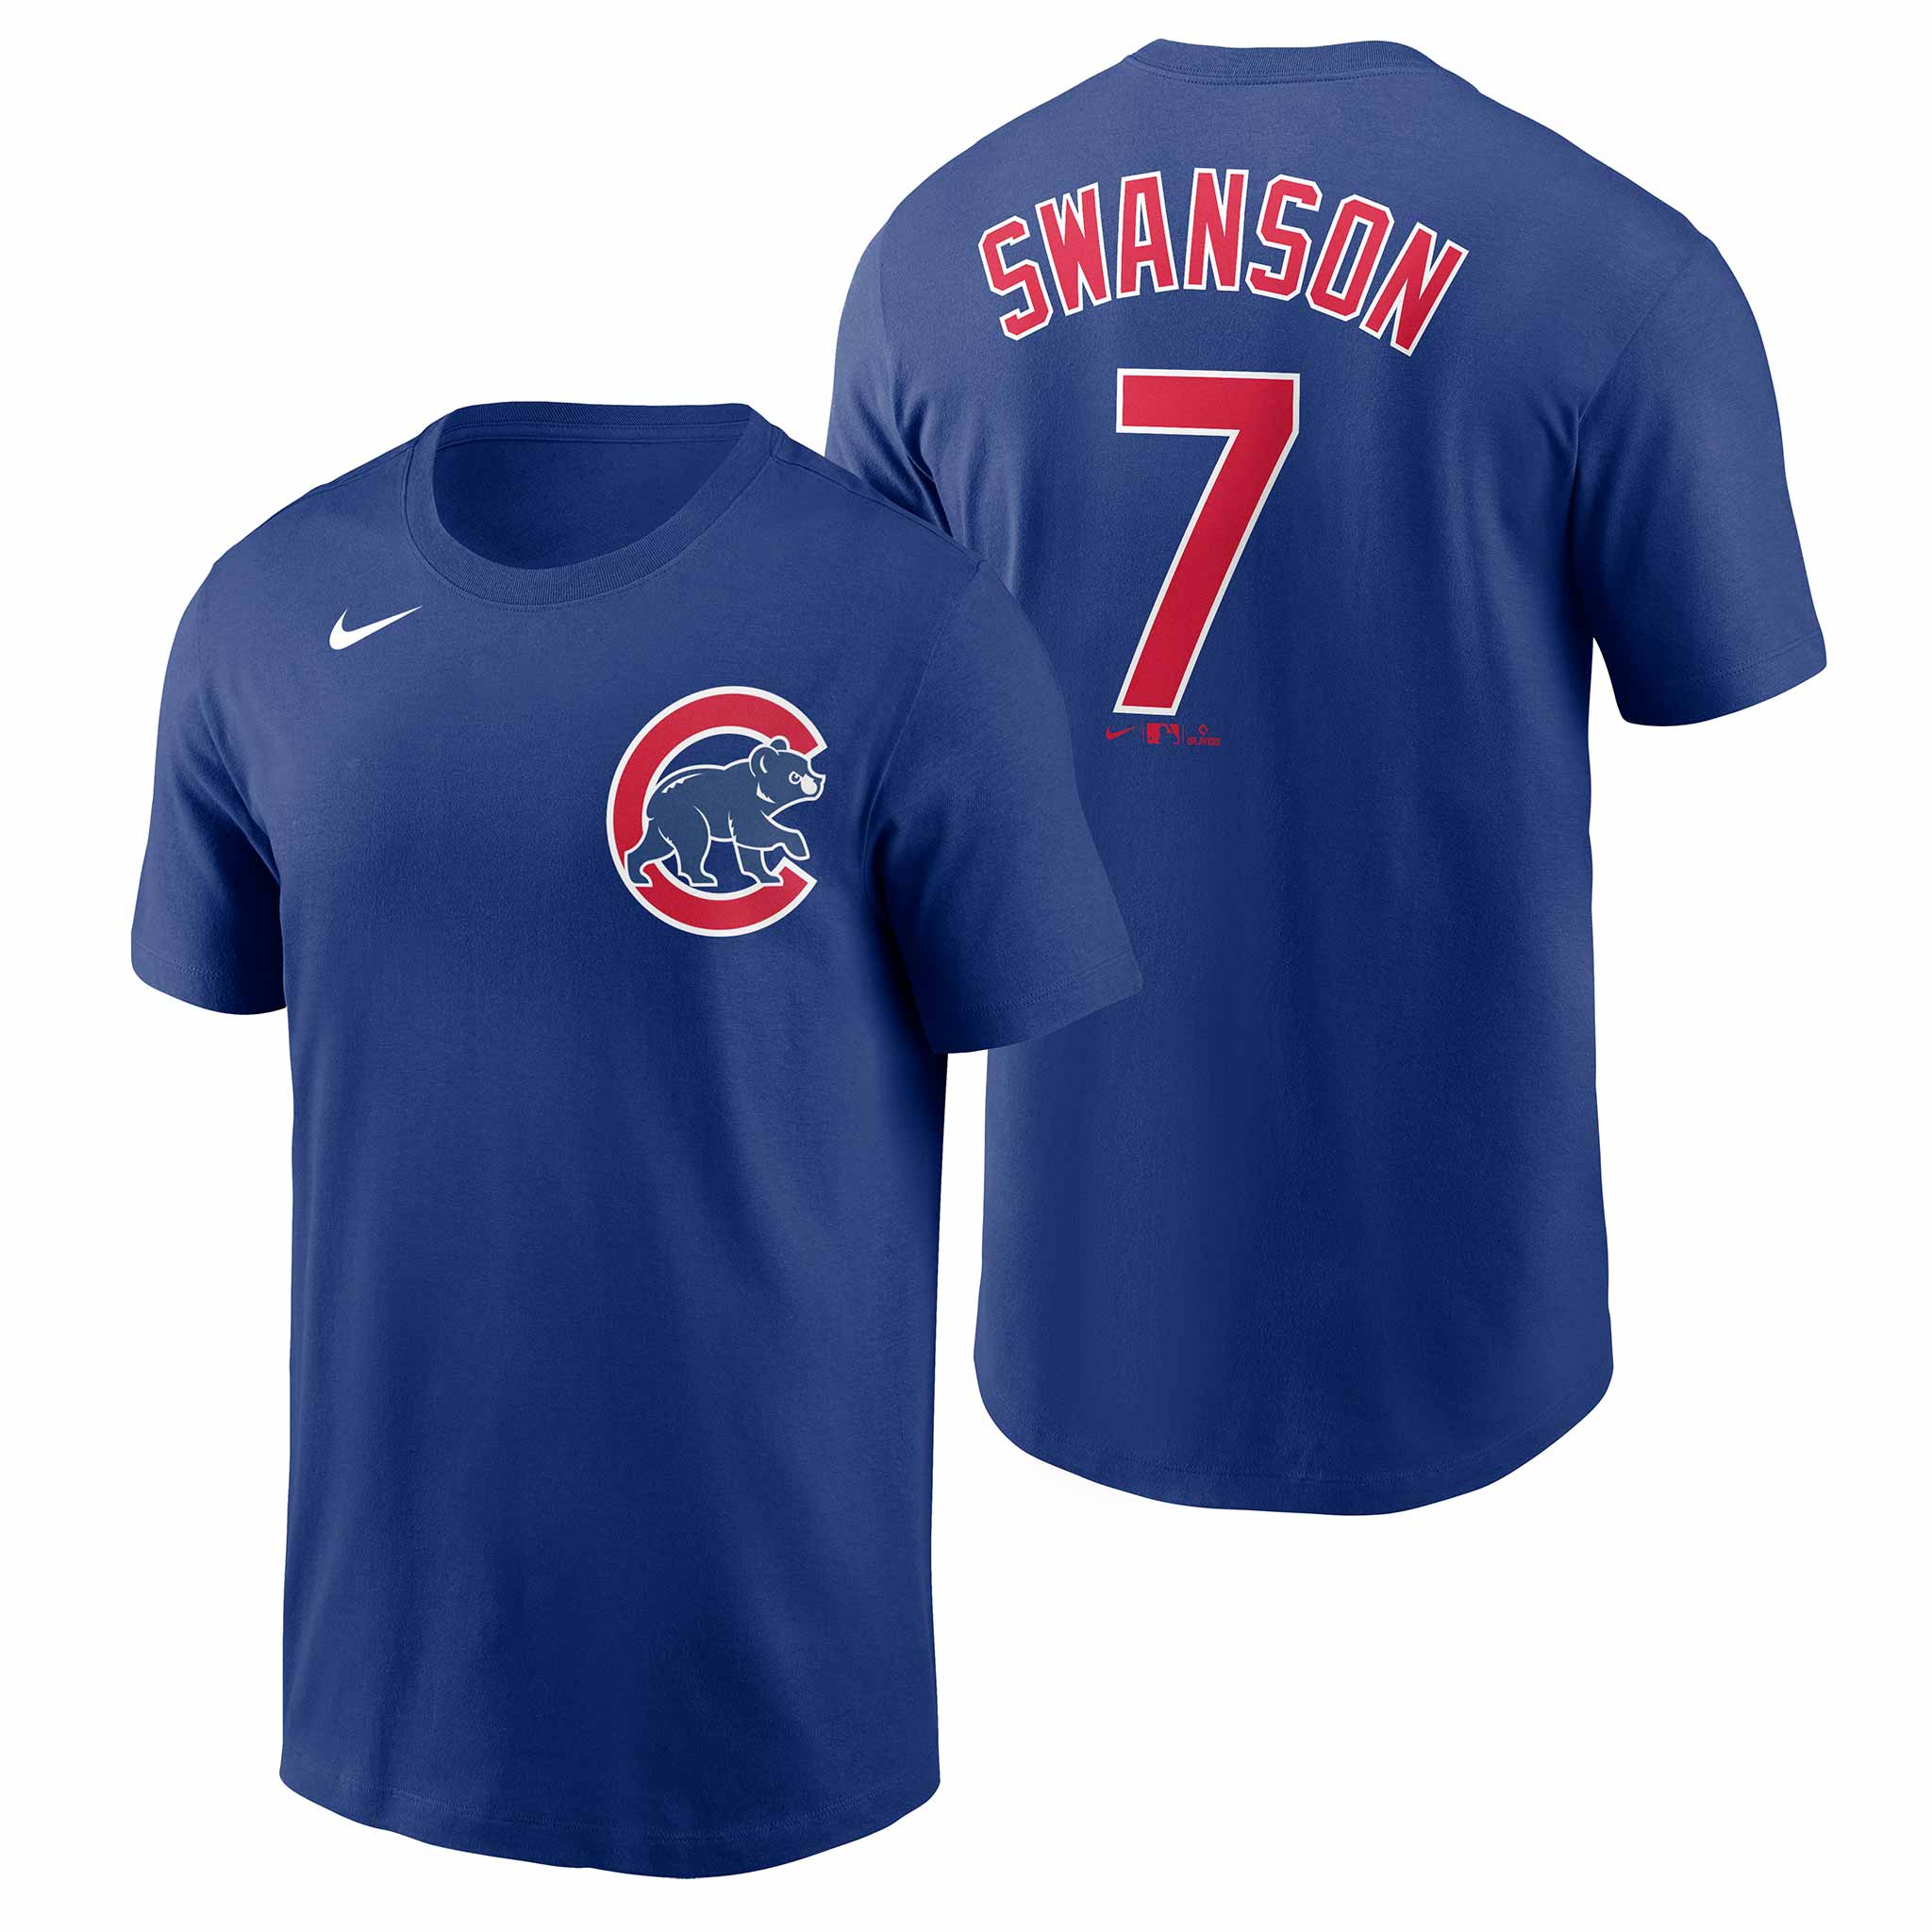 Chicago Cubs Dansby Swanson Nike Name & Number T-Shirt Medium